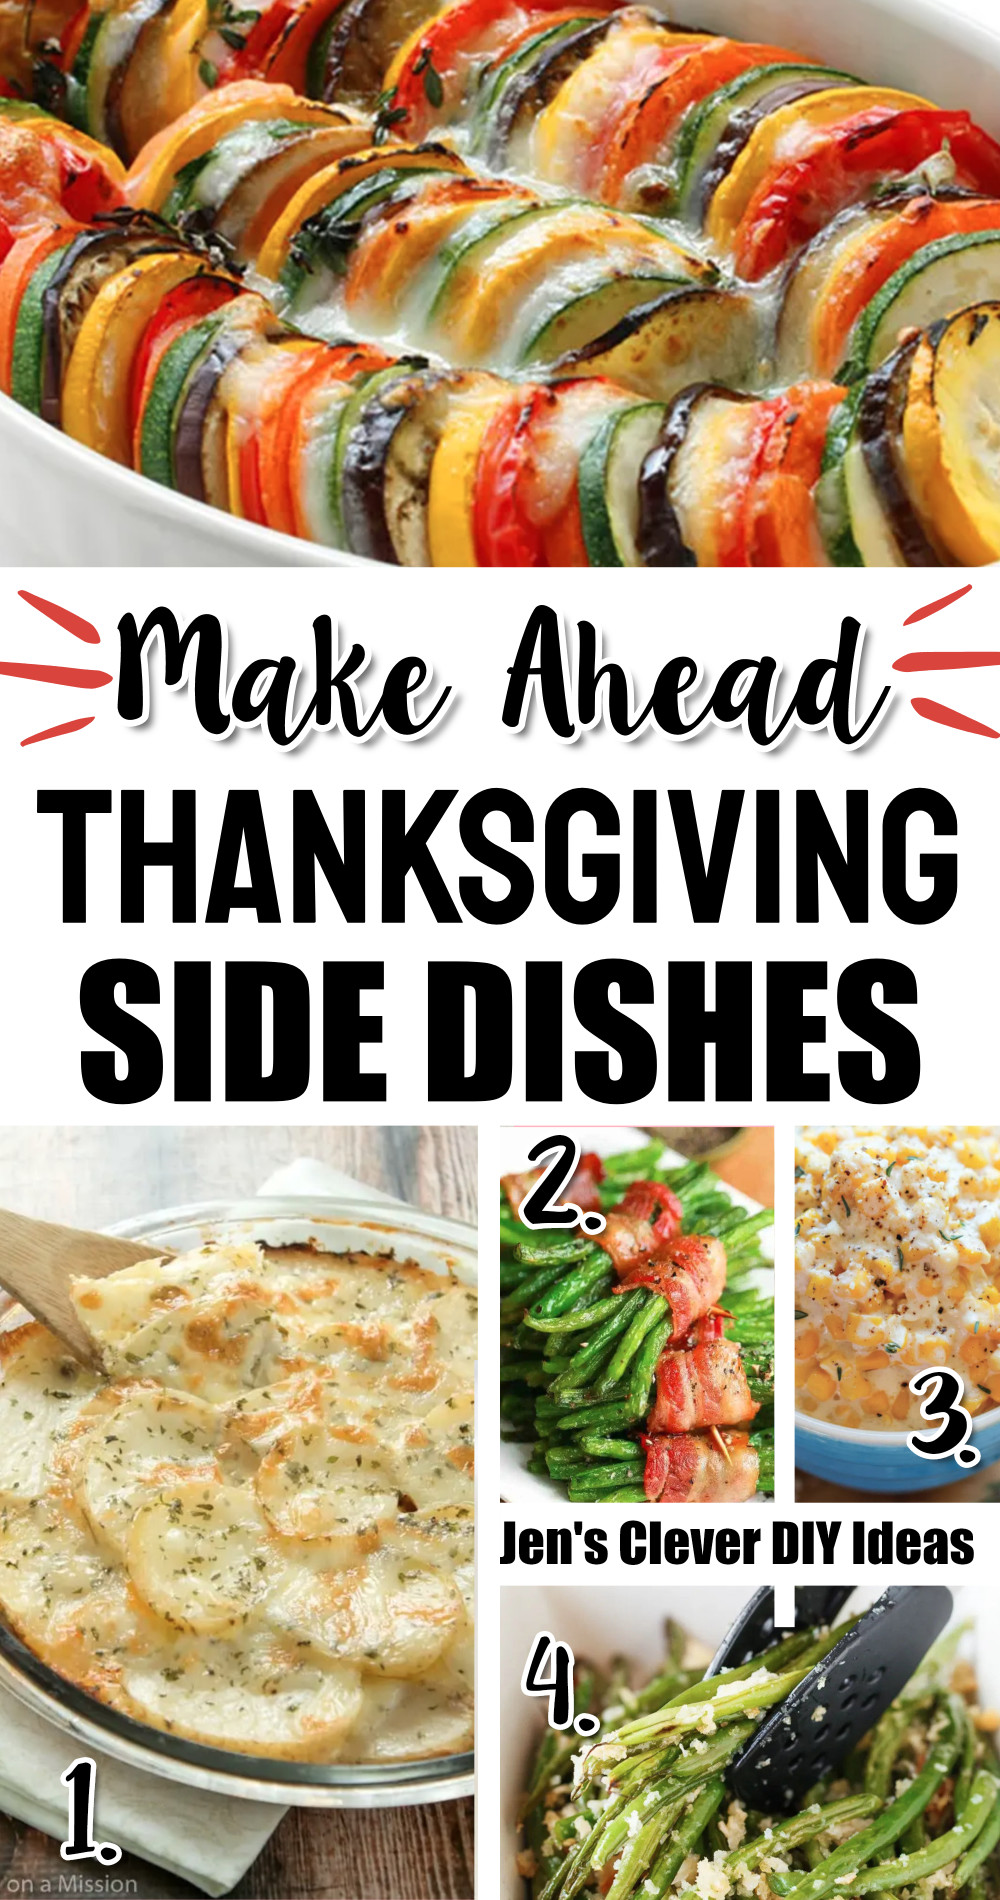 5 side dishes for Thanksgiving